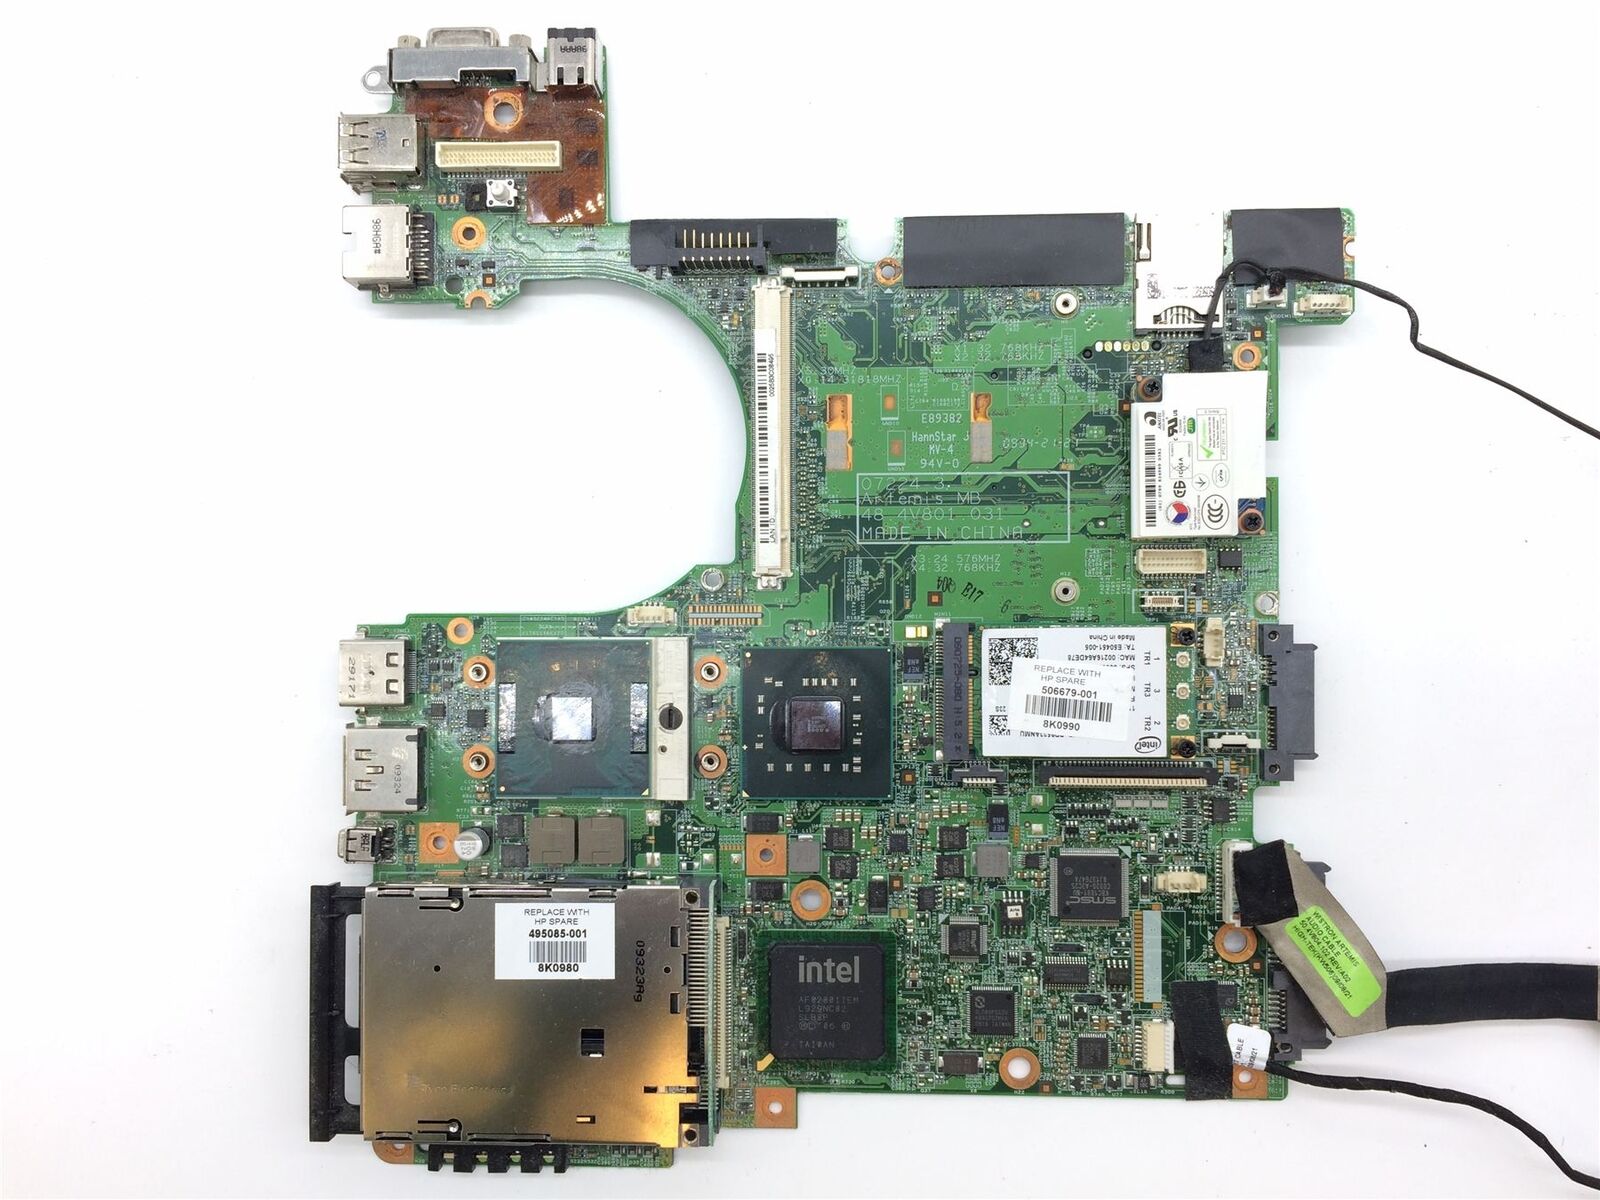 HP 8530w Motherboard 500907-001 + CPU Intel p8600 2.4ghz Marke: HP Modell: 8530w CPU Taktrate: 2.4ghz Herste - Click Image to Close